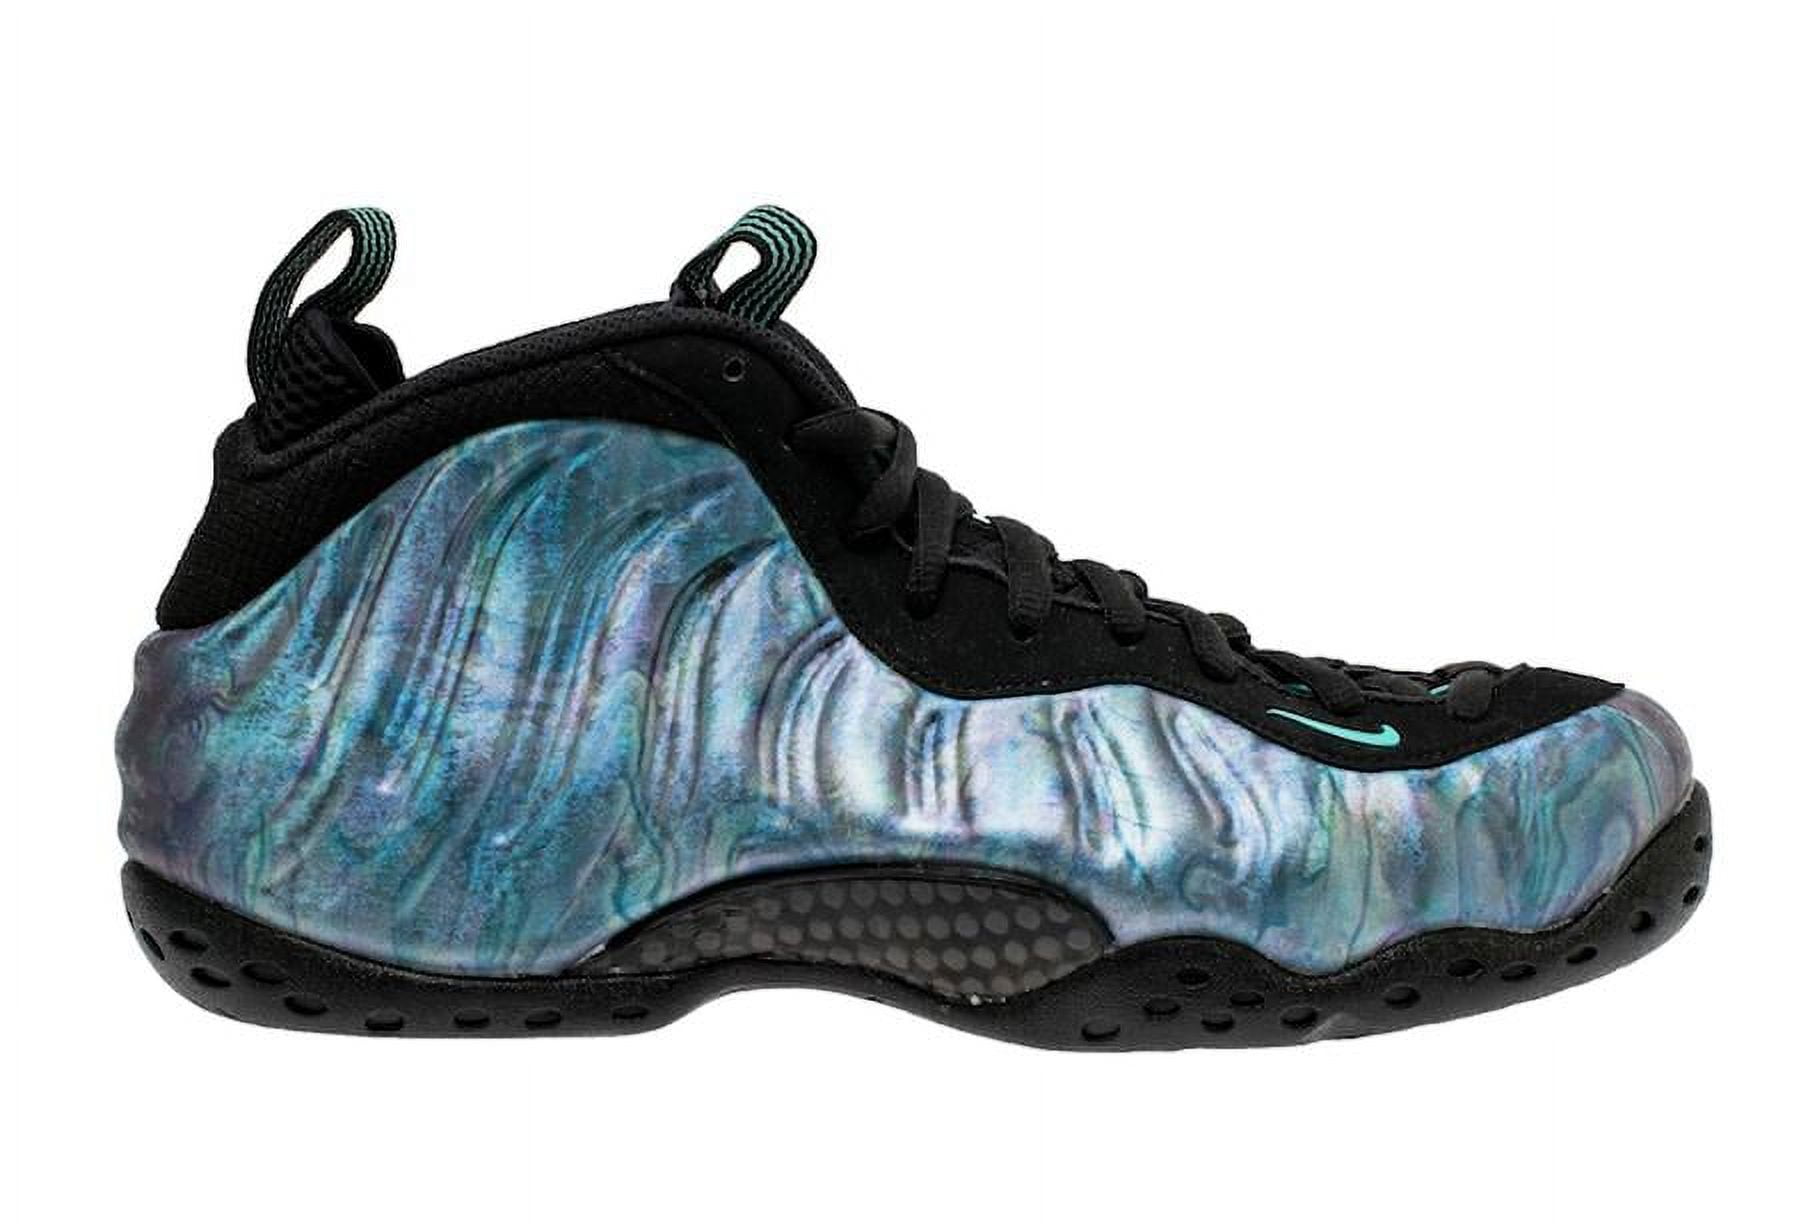 NIKE AIR FOAMPOSITE ONE PRM ABALONE US12